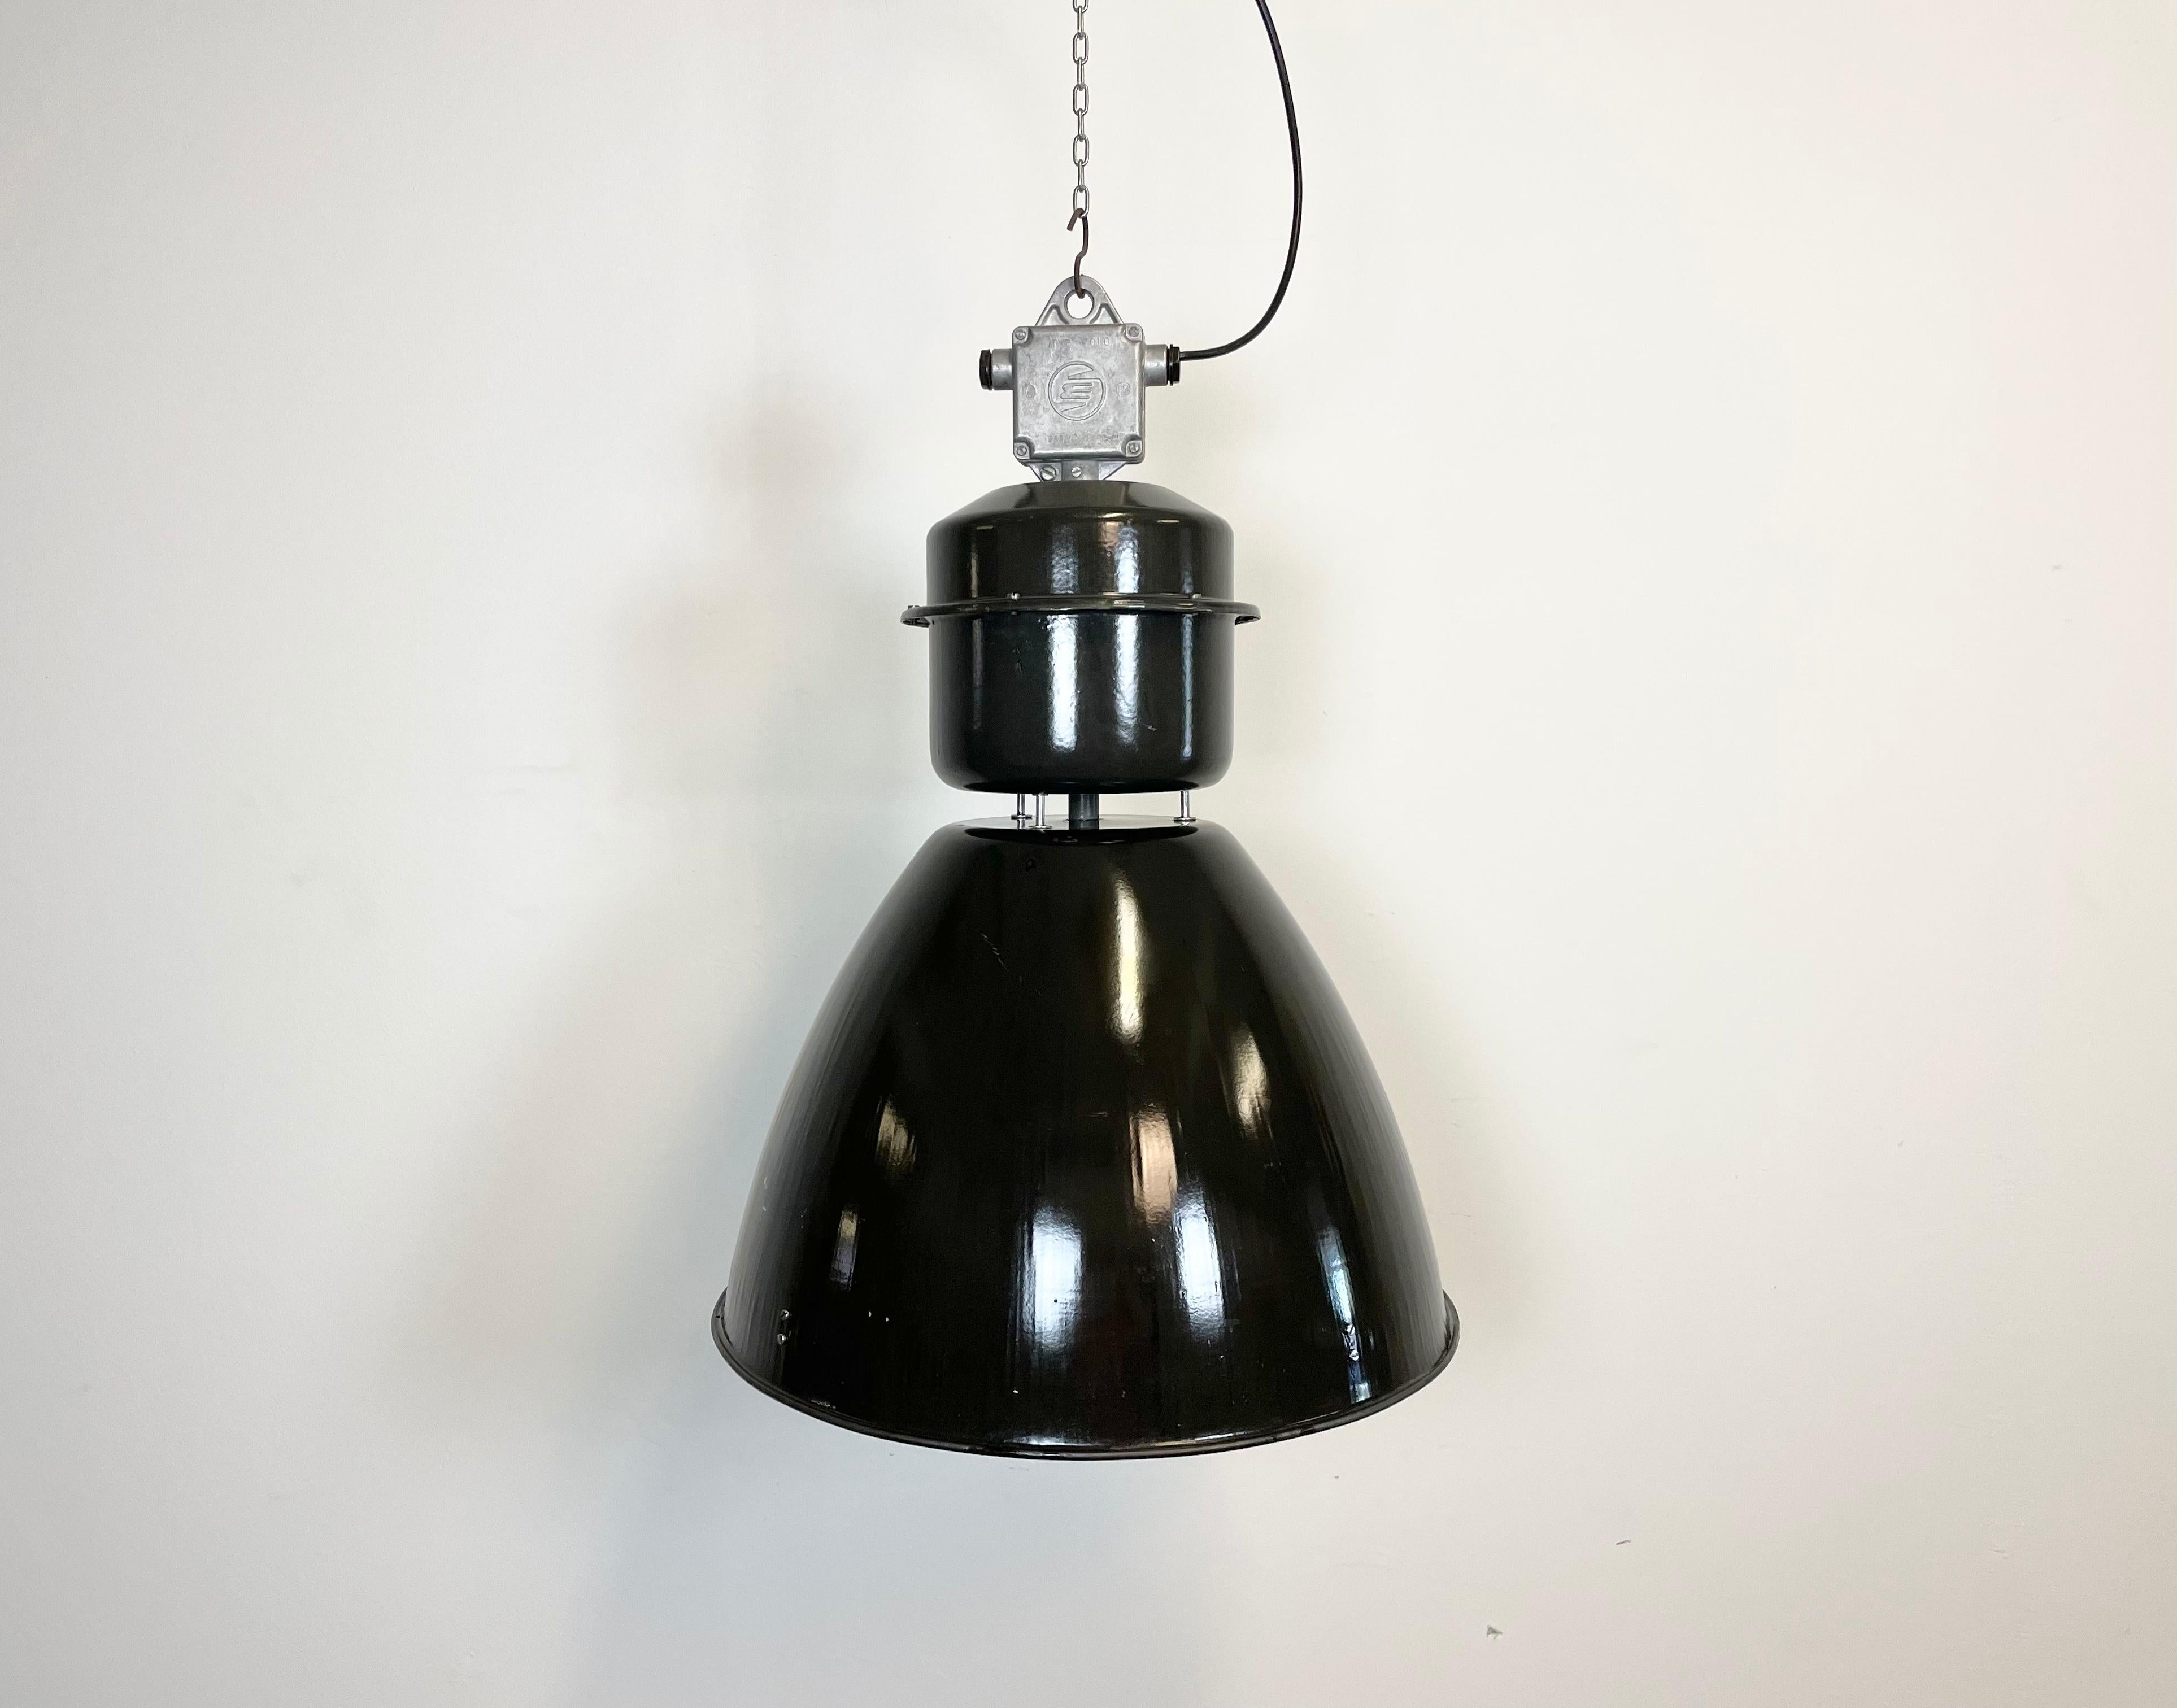 This black industrial pendant light was designed in the 1960s and produced by Elektrosvit in the former Czechoslovakia. It features a cast aluminium top, a black enamel exterior and a white enamel interior.
New porcelain socket for E 27 lightbulbs